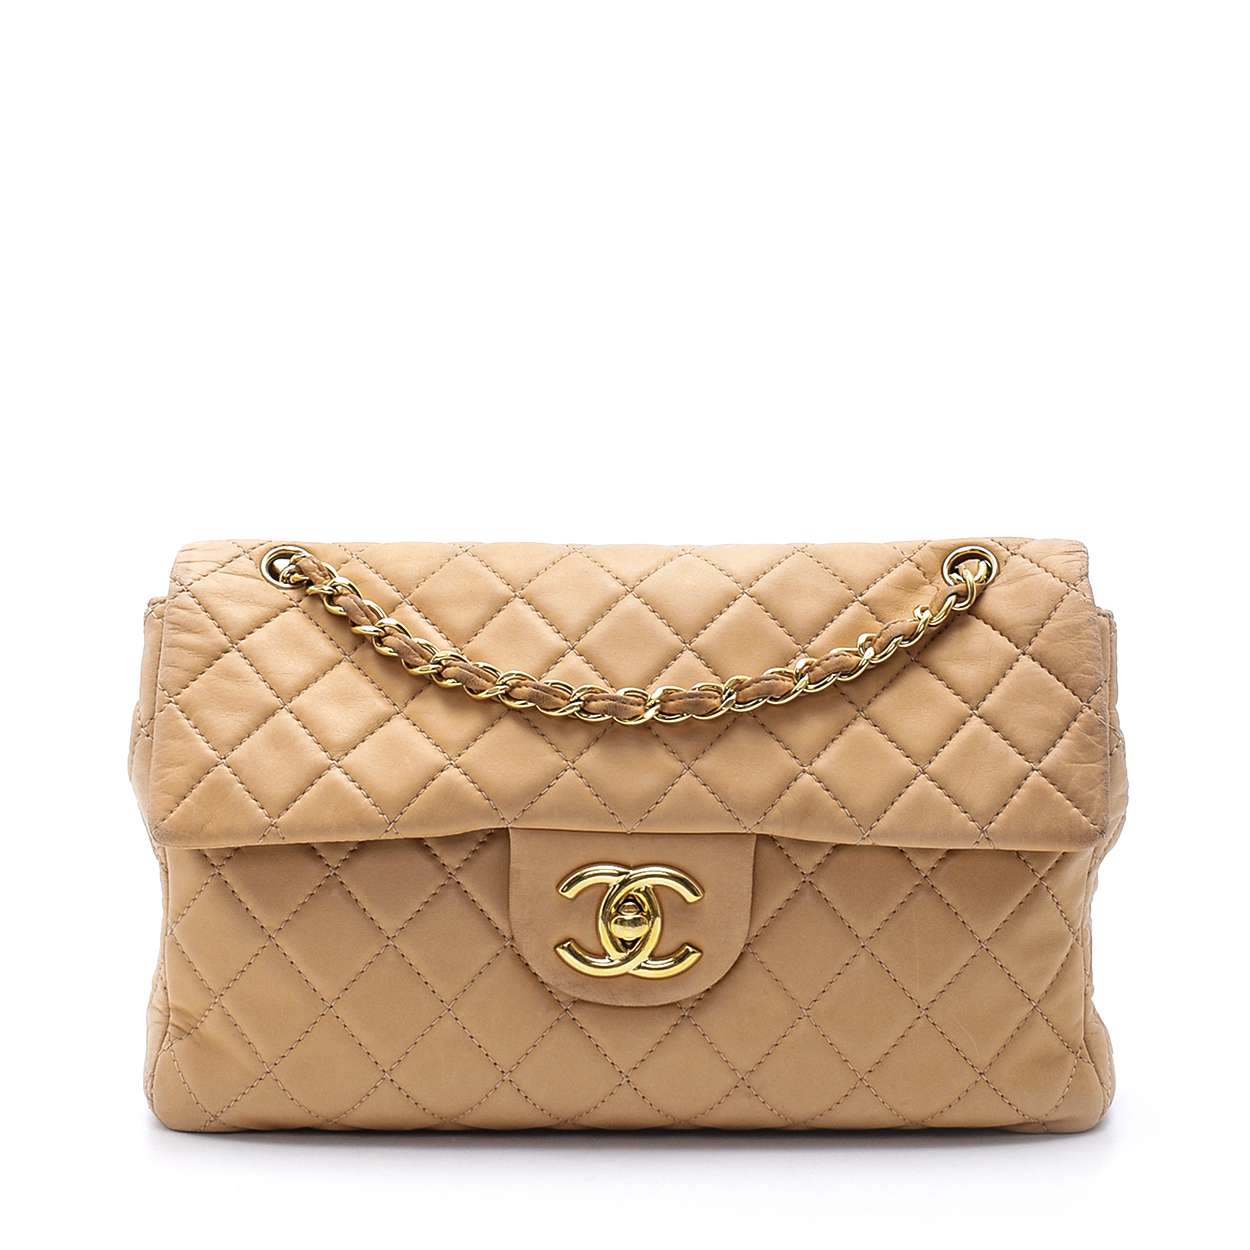 Chanel - Beige Quilted Lambskin Leather Jumbo Single Flap Bag